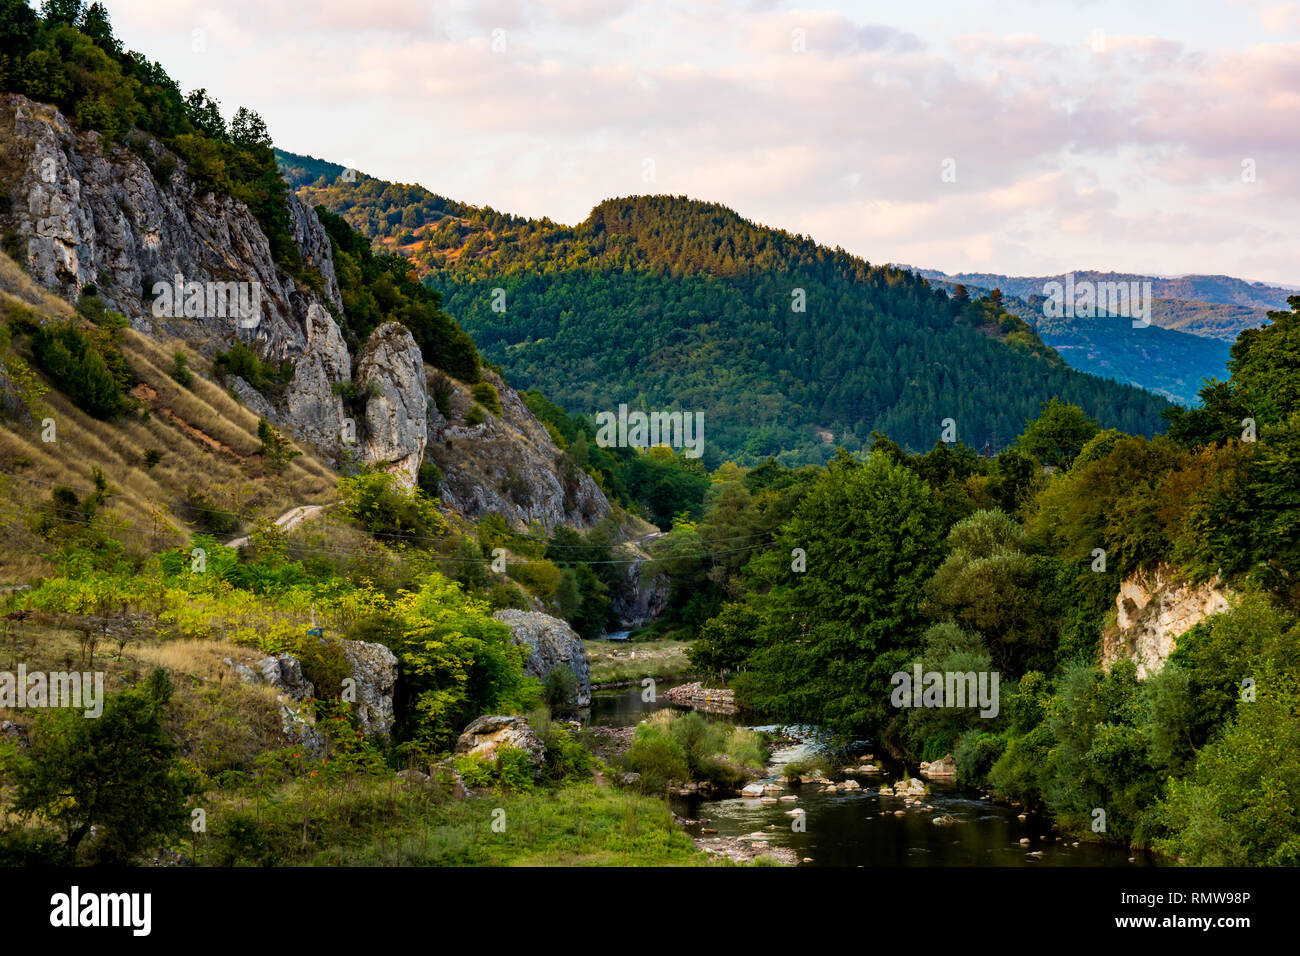 Temstica or Topli Do River on an old mountain ( Stara Planina ) in the vicinity of lake Zavoj, surrounded by dense vegetation and forest, Stock Photo